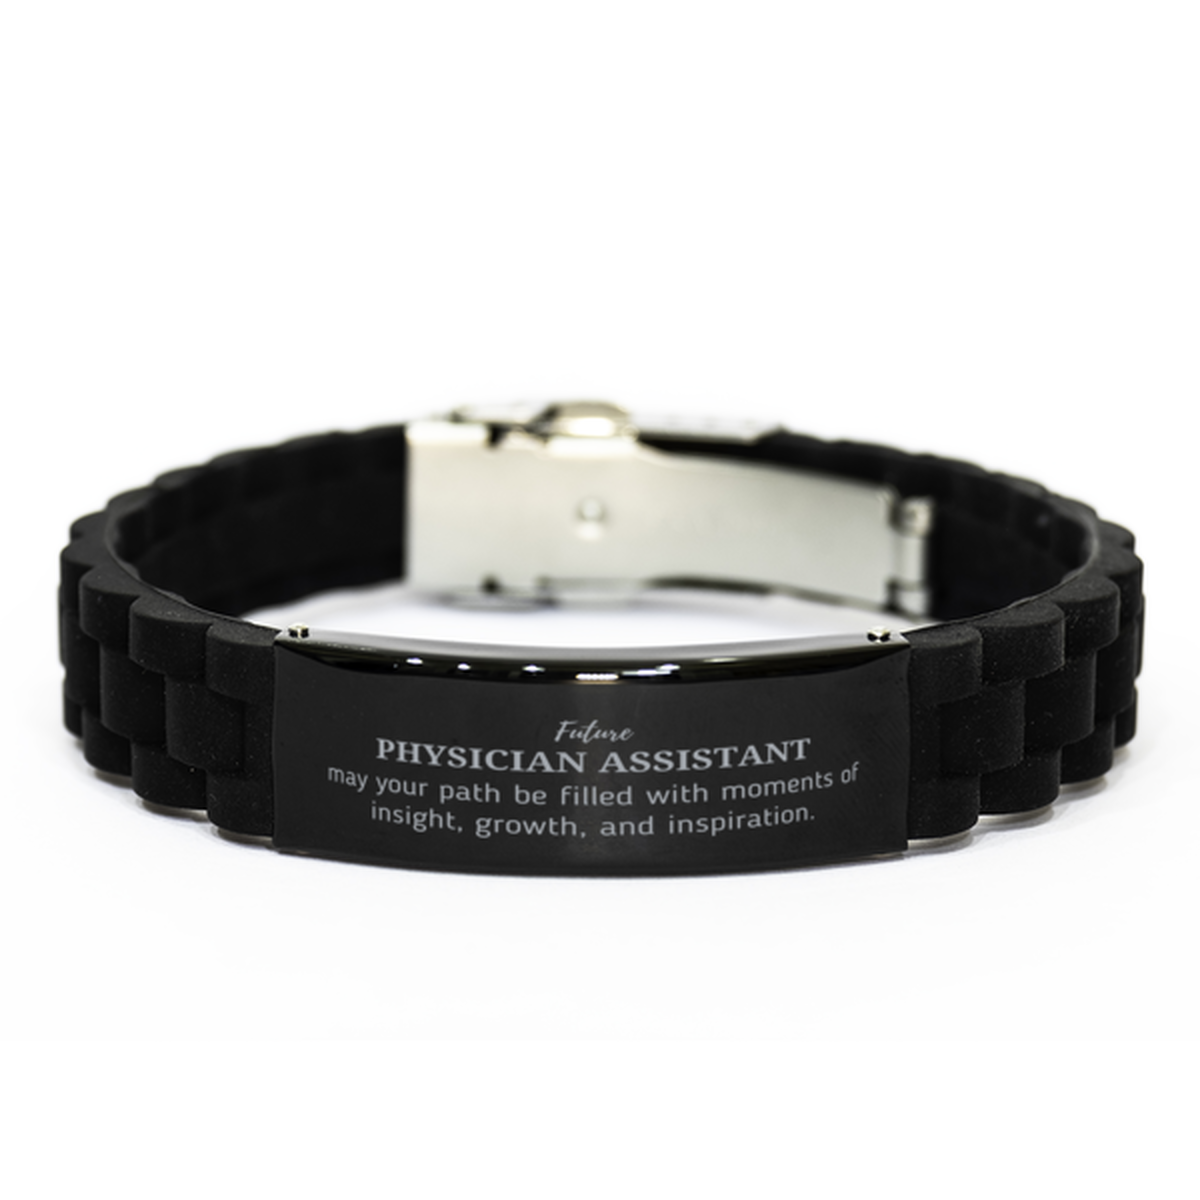 Future Physician Assistant Gifts, May your path be filled with moments of insight, Graduation Gifts for New Physician Assistant, Christmas Unique Black Glidelock Clasp Bracelet For Men, Women, Friends